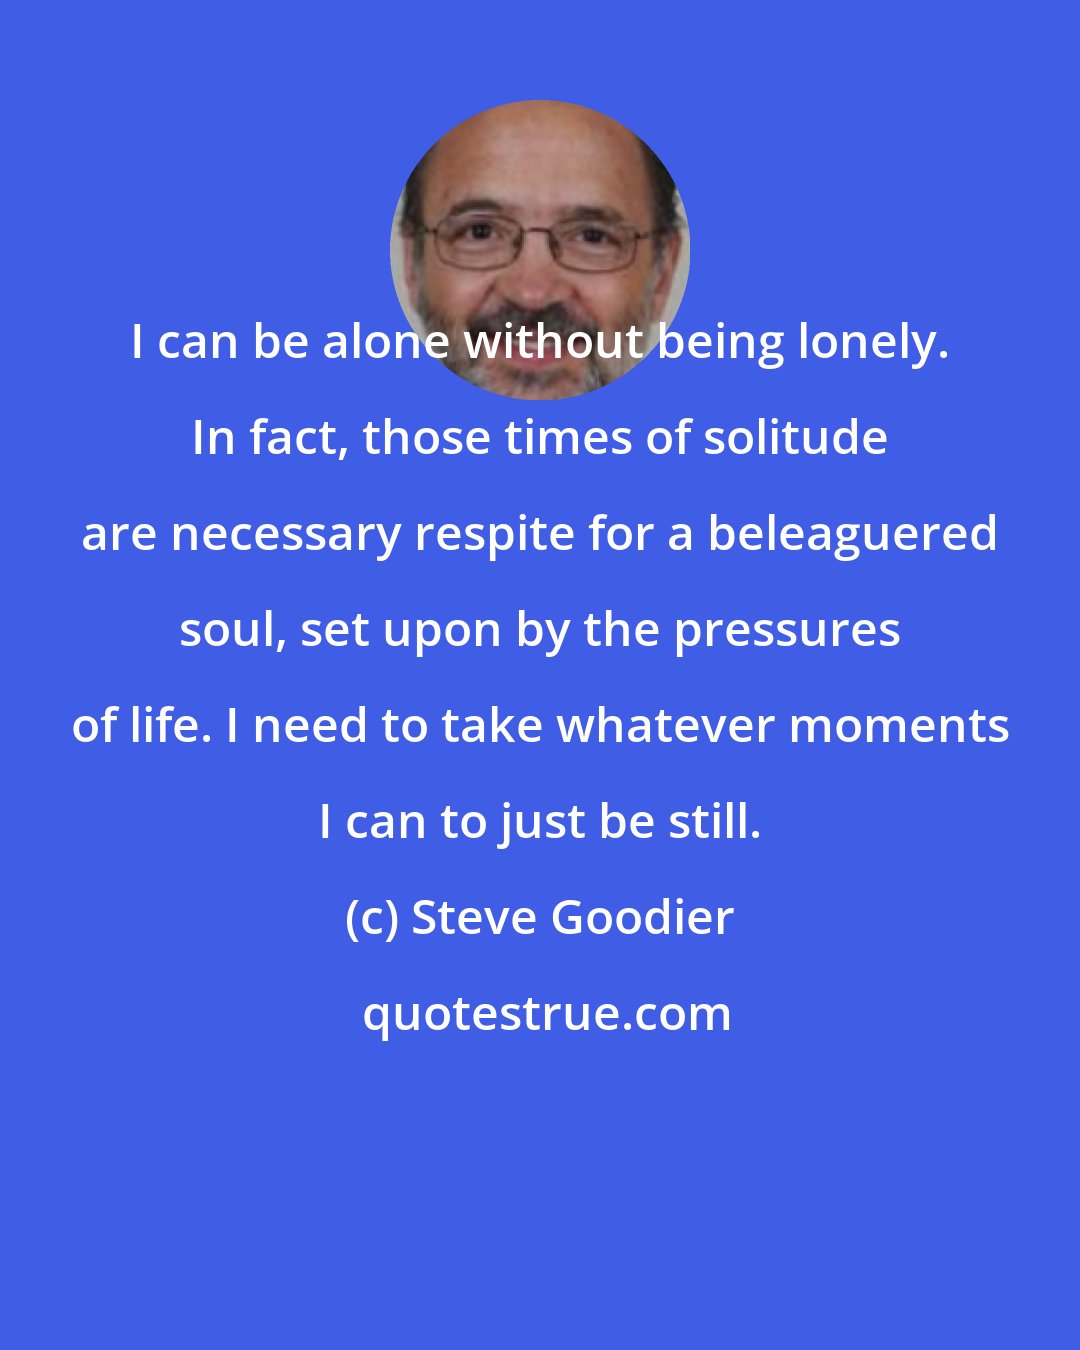 Steve Goodier: I can be alone without being lonely. In fact, those times of solitude are necessary respite for a beleaguered soul, set upon by the pressures of life. I need to take whatever moments I can to just be still.